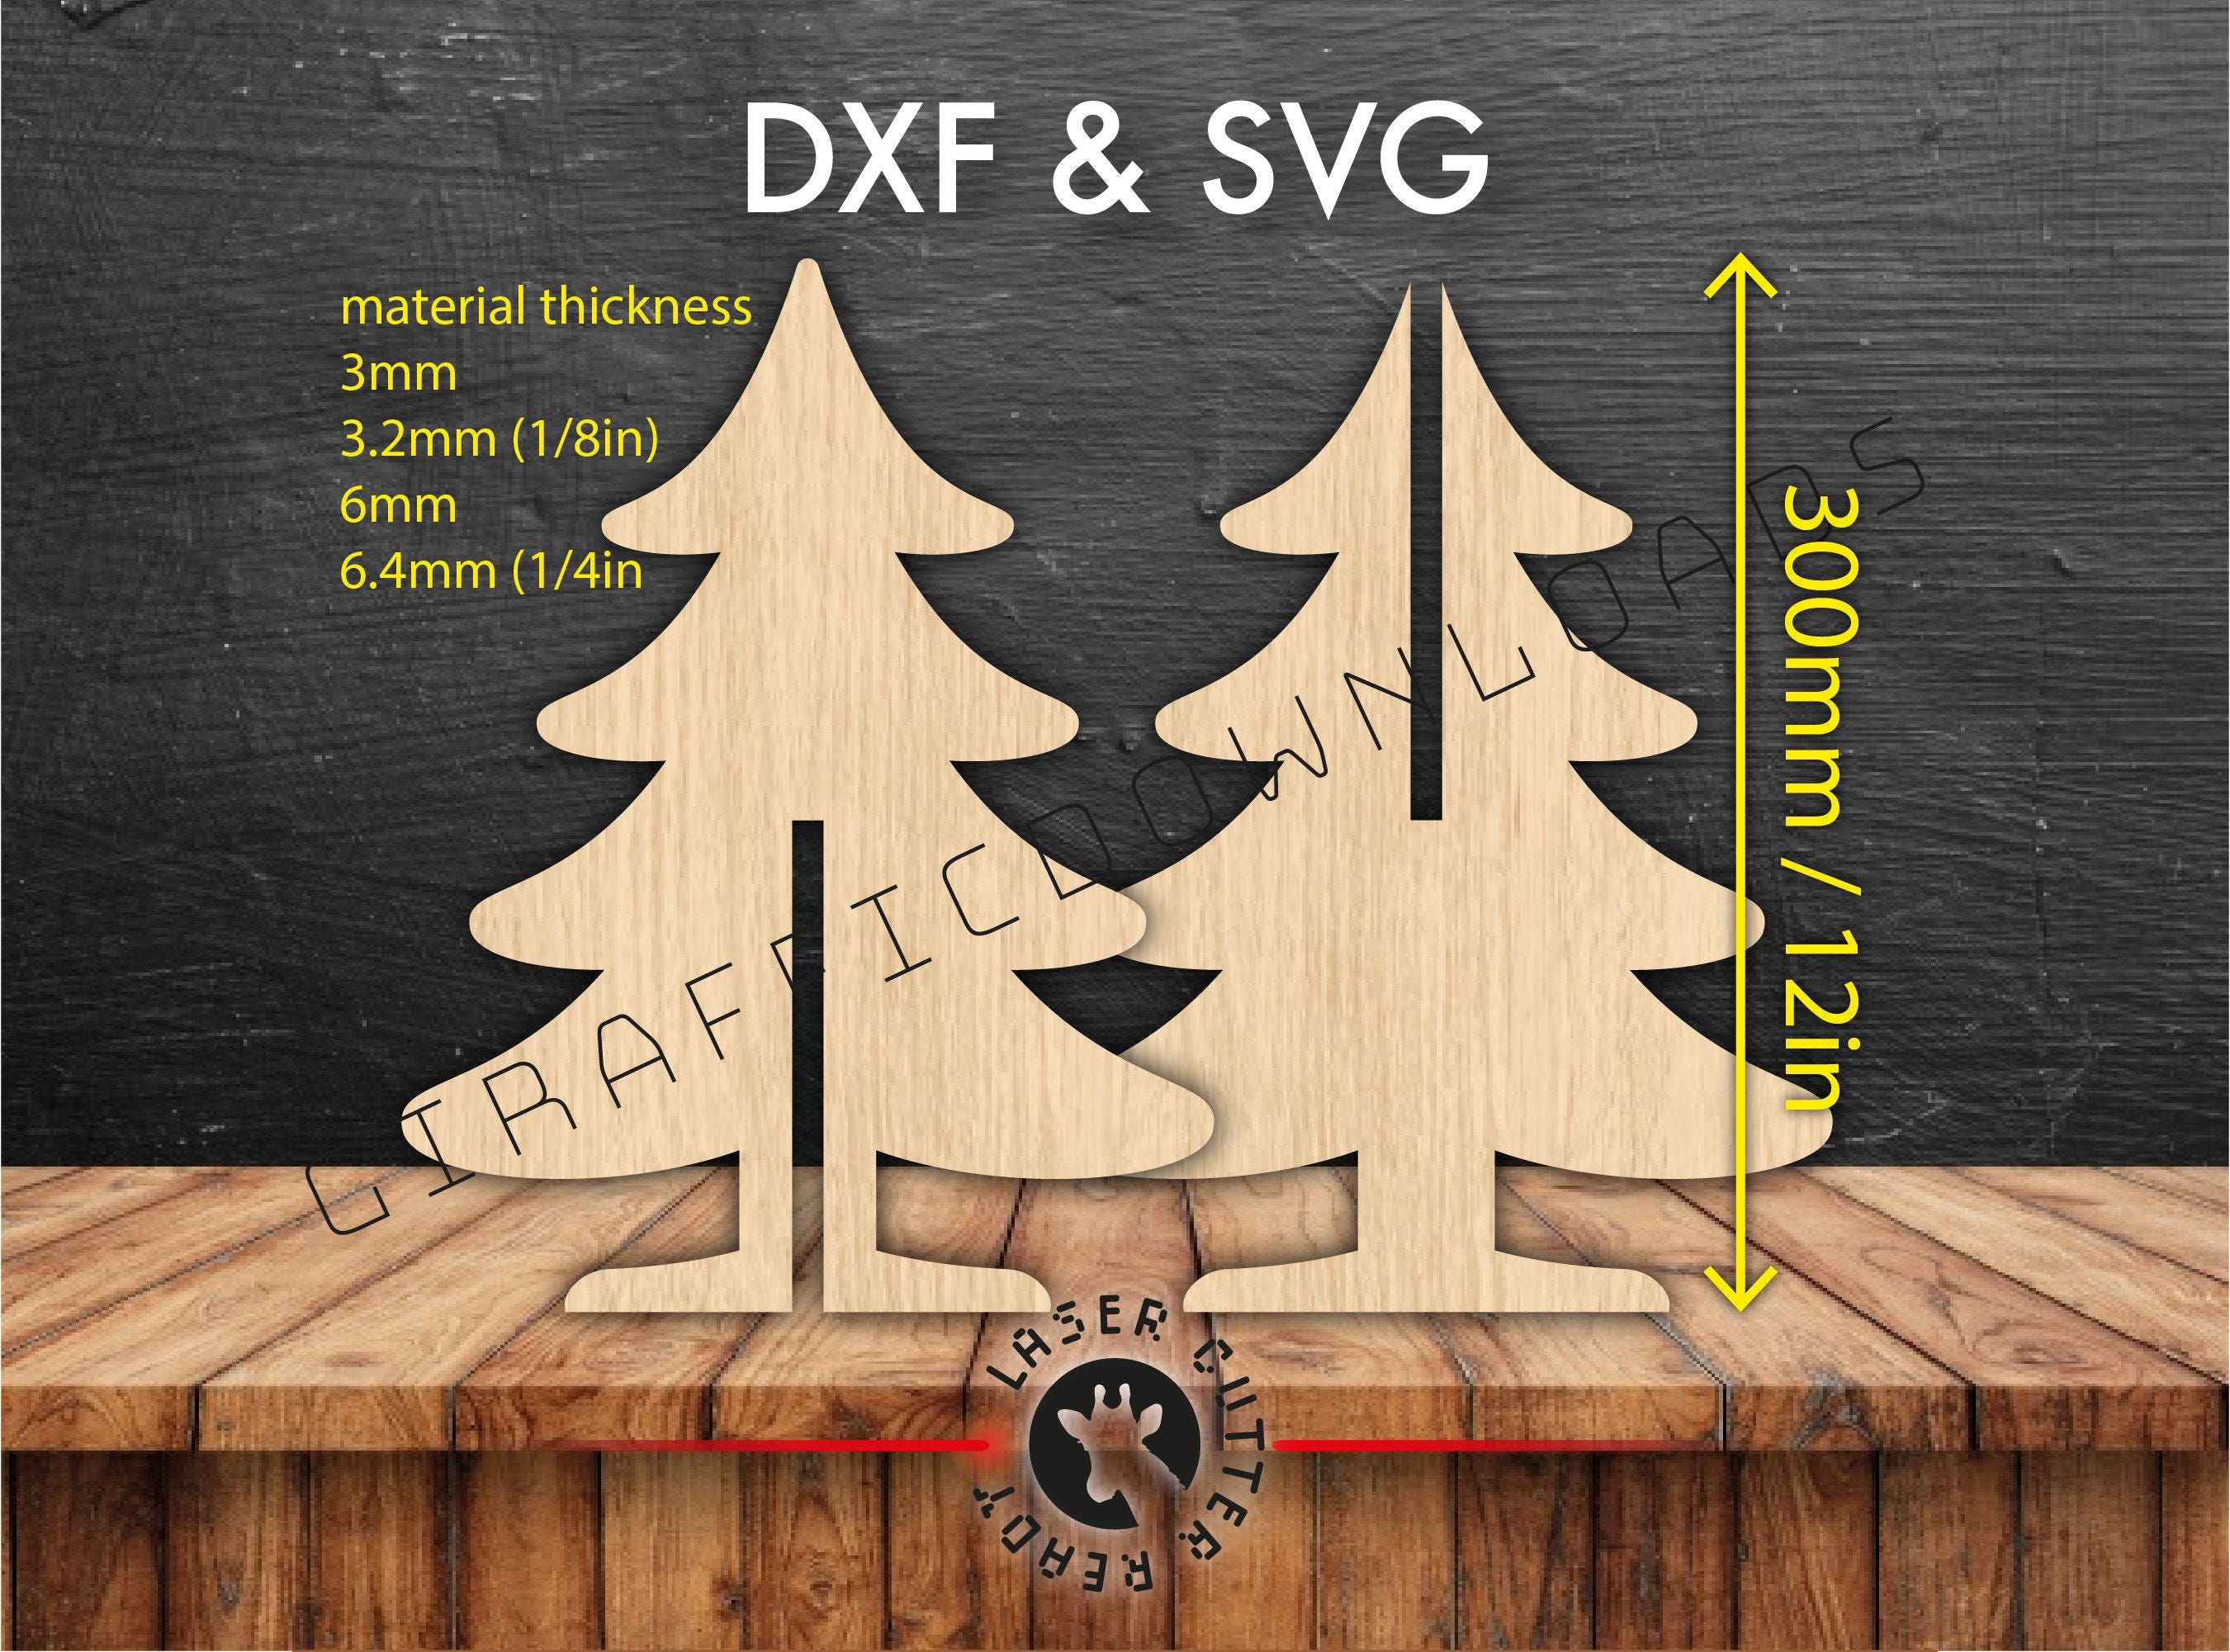 3D 12in / 300mm DXF SVG Christmas Tree file 1/8in freestanding CNC router cutting digital vector plans template centre piece download